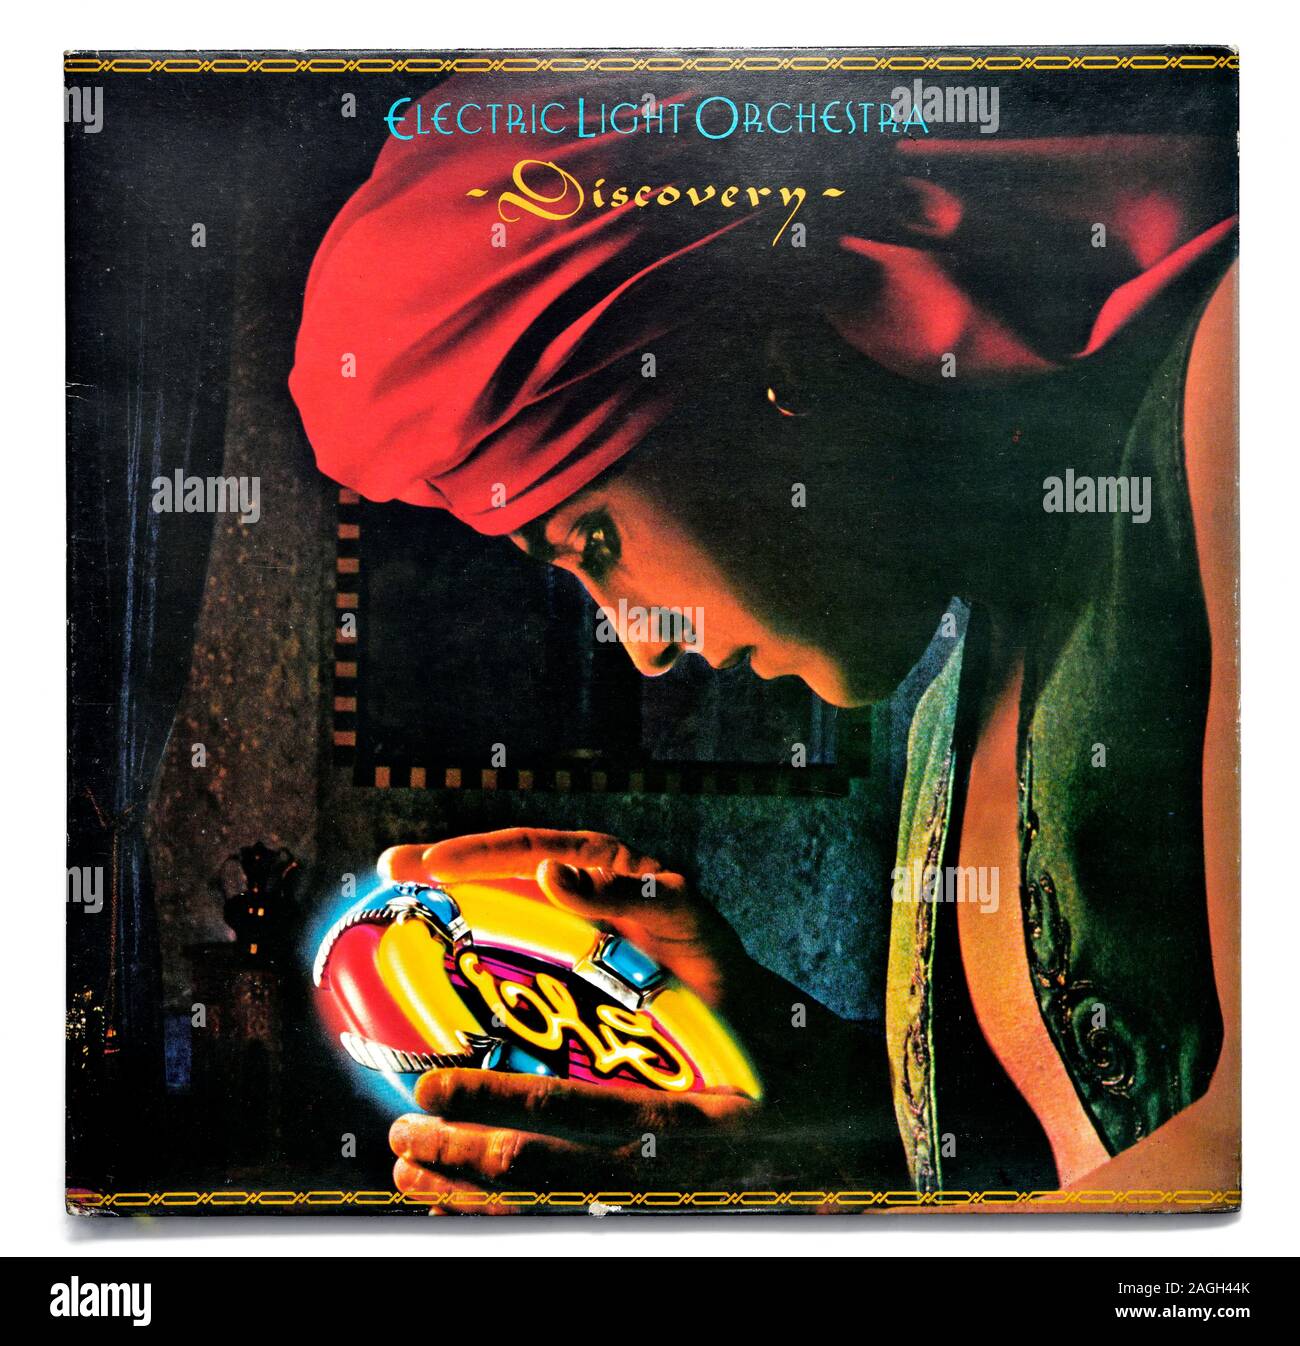 Electric Light Orchestra, Discovery Album Cover Stockfoto